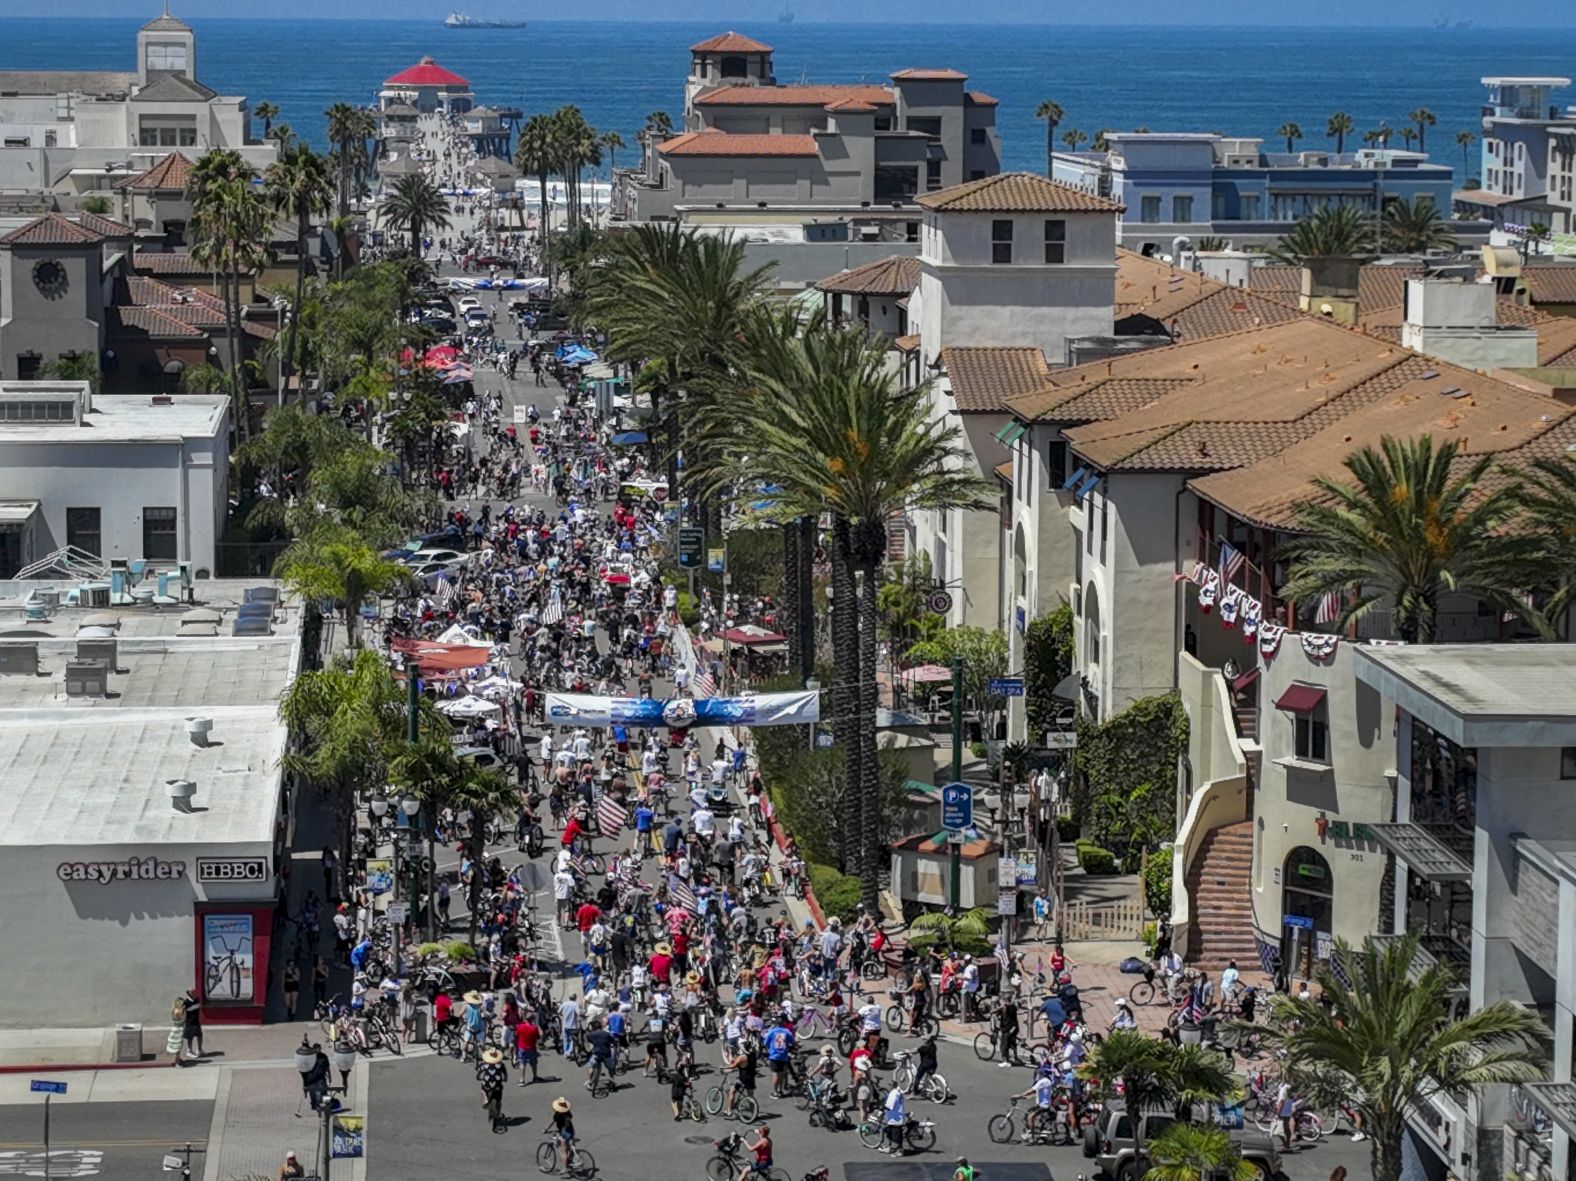 More than 1,000 people make their way down Main Street in Huntington Beach, California, for the third annual Fourth of July Bicycle Cruise on Saturday.